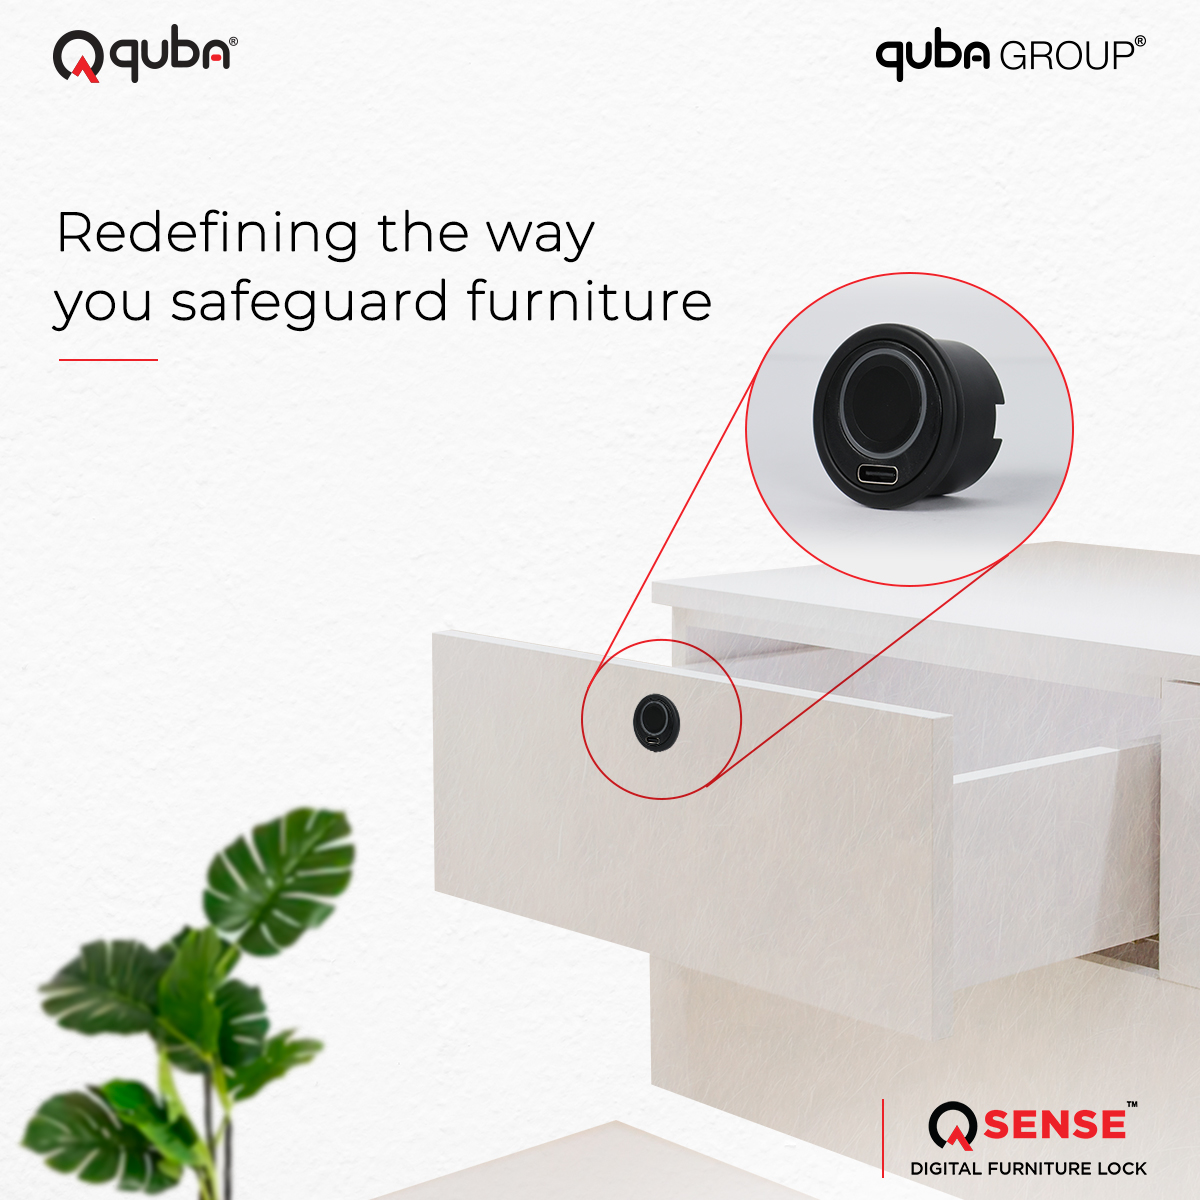 Upgrade your furniture's security game with QSense. Experience the convenience of keyless access and the peace of mind that comes with advanced technology. ​

​#SmartFurniture ​#NewProductLaunch #FurnitureTechnology #QSense #Quba #QubaGroupIndia